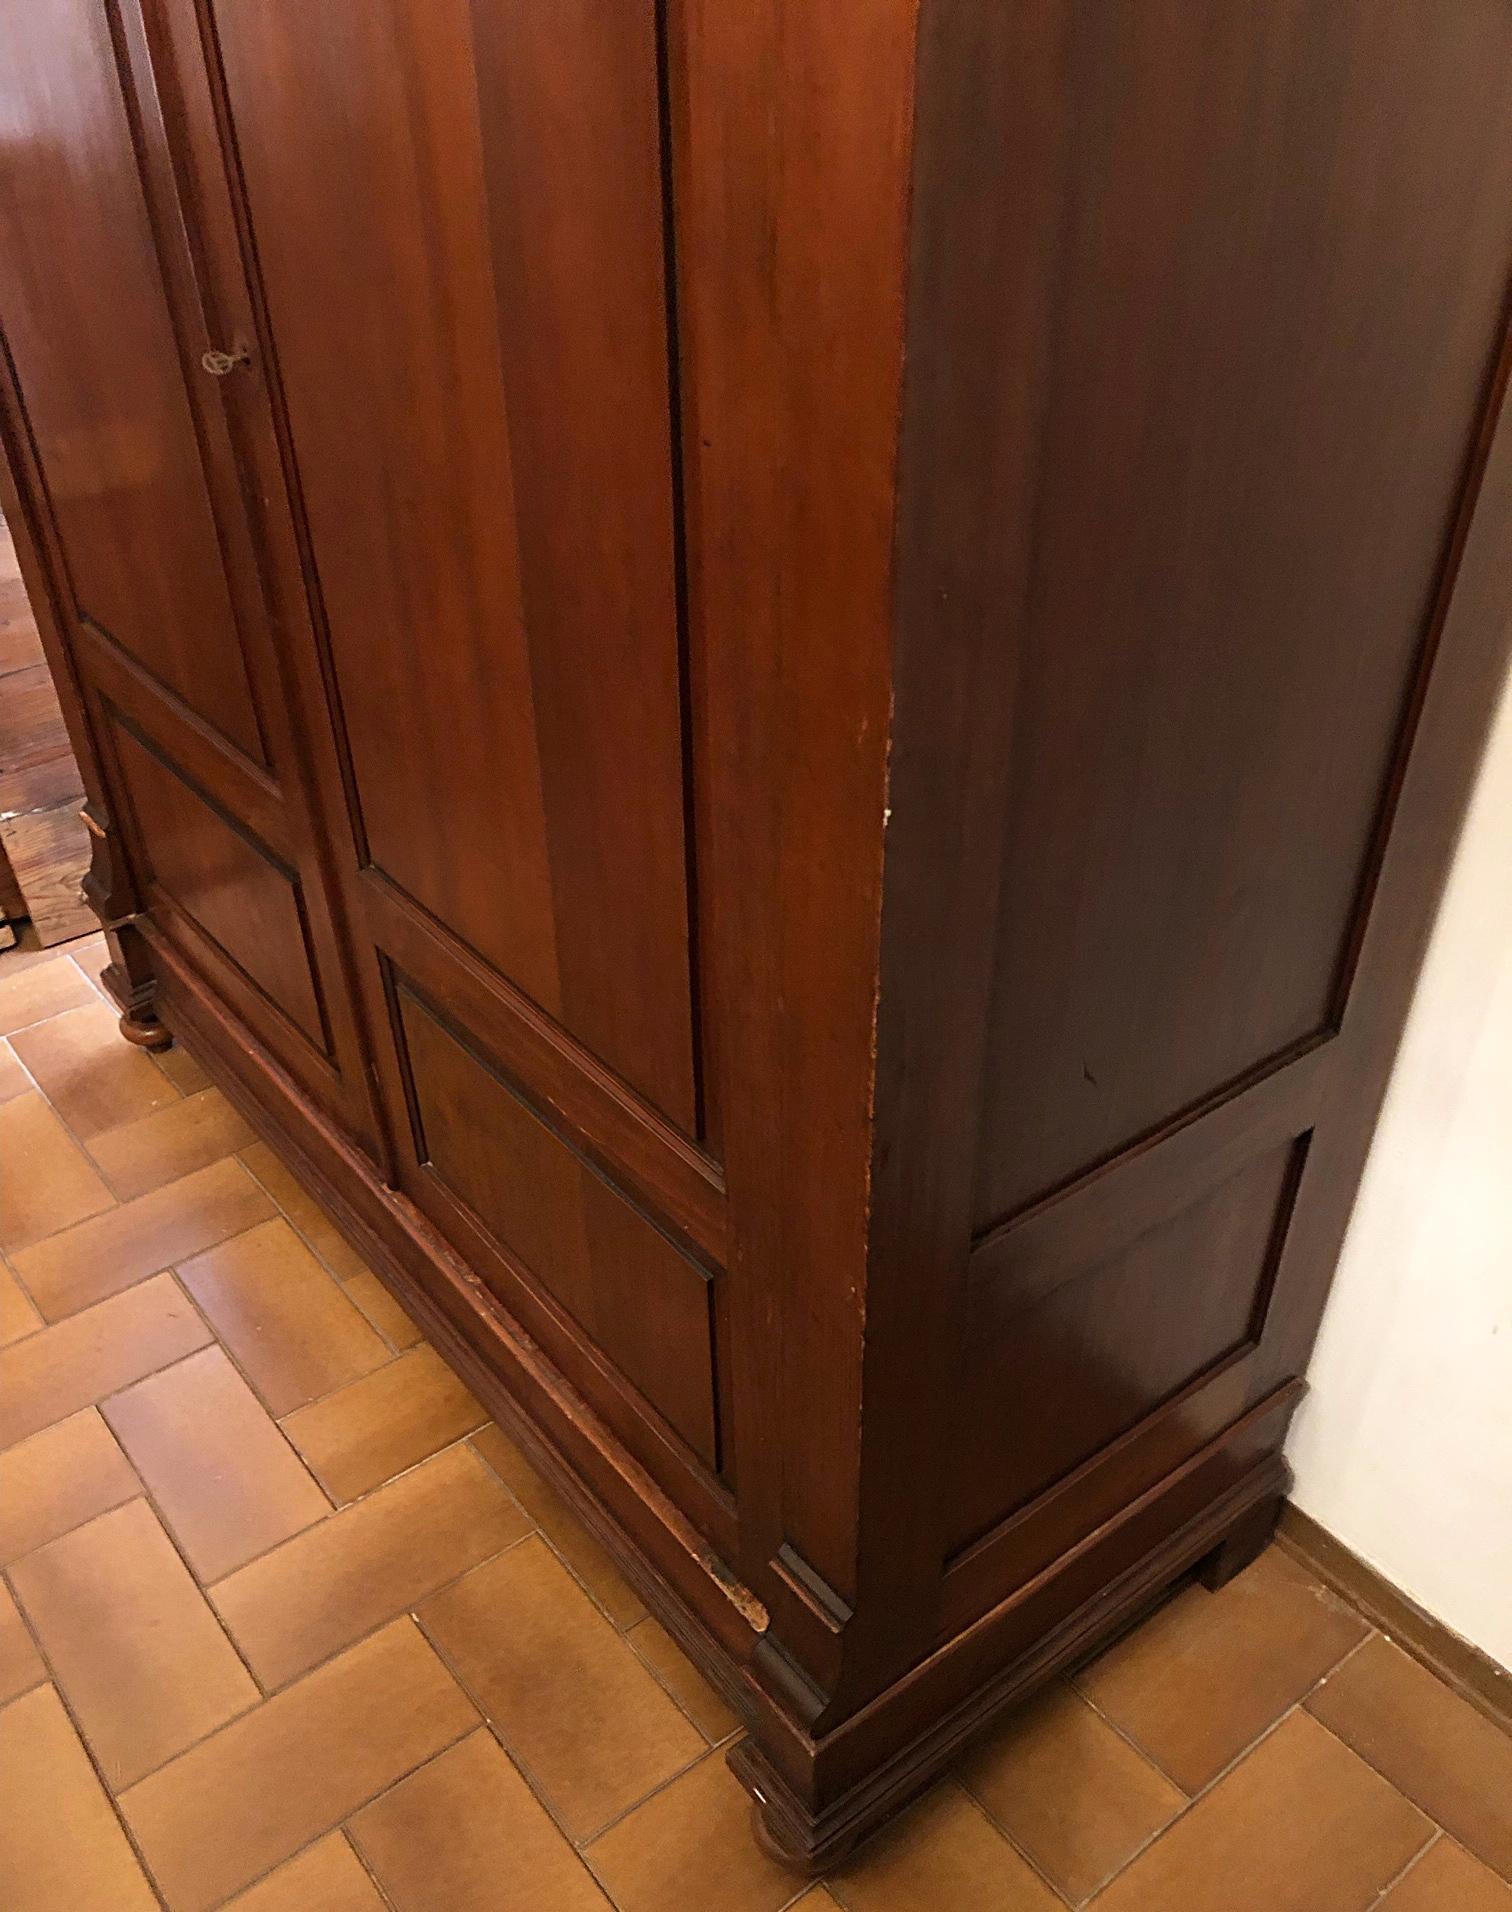 Italian wardrobe of the twentieth century in walnut color fir.
 It is completely disassembled and can be easily assembled in 15 minutes.
 The color is original and inside it has two shelves and clothes rails.
The useful internal depth is 50